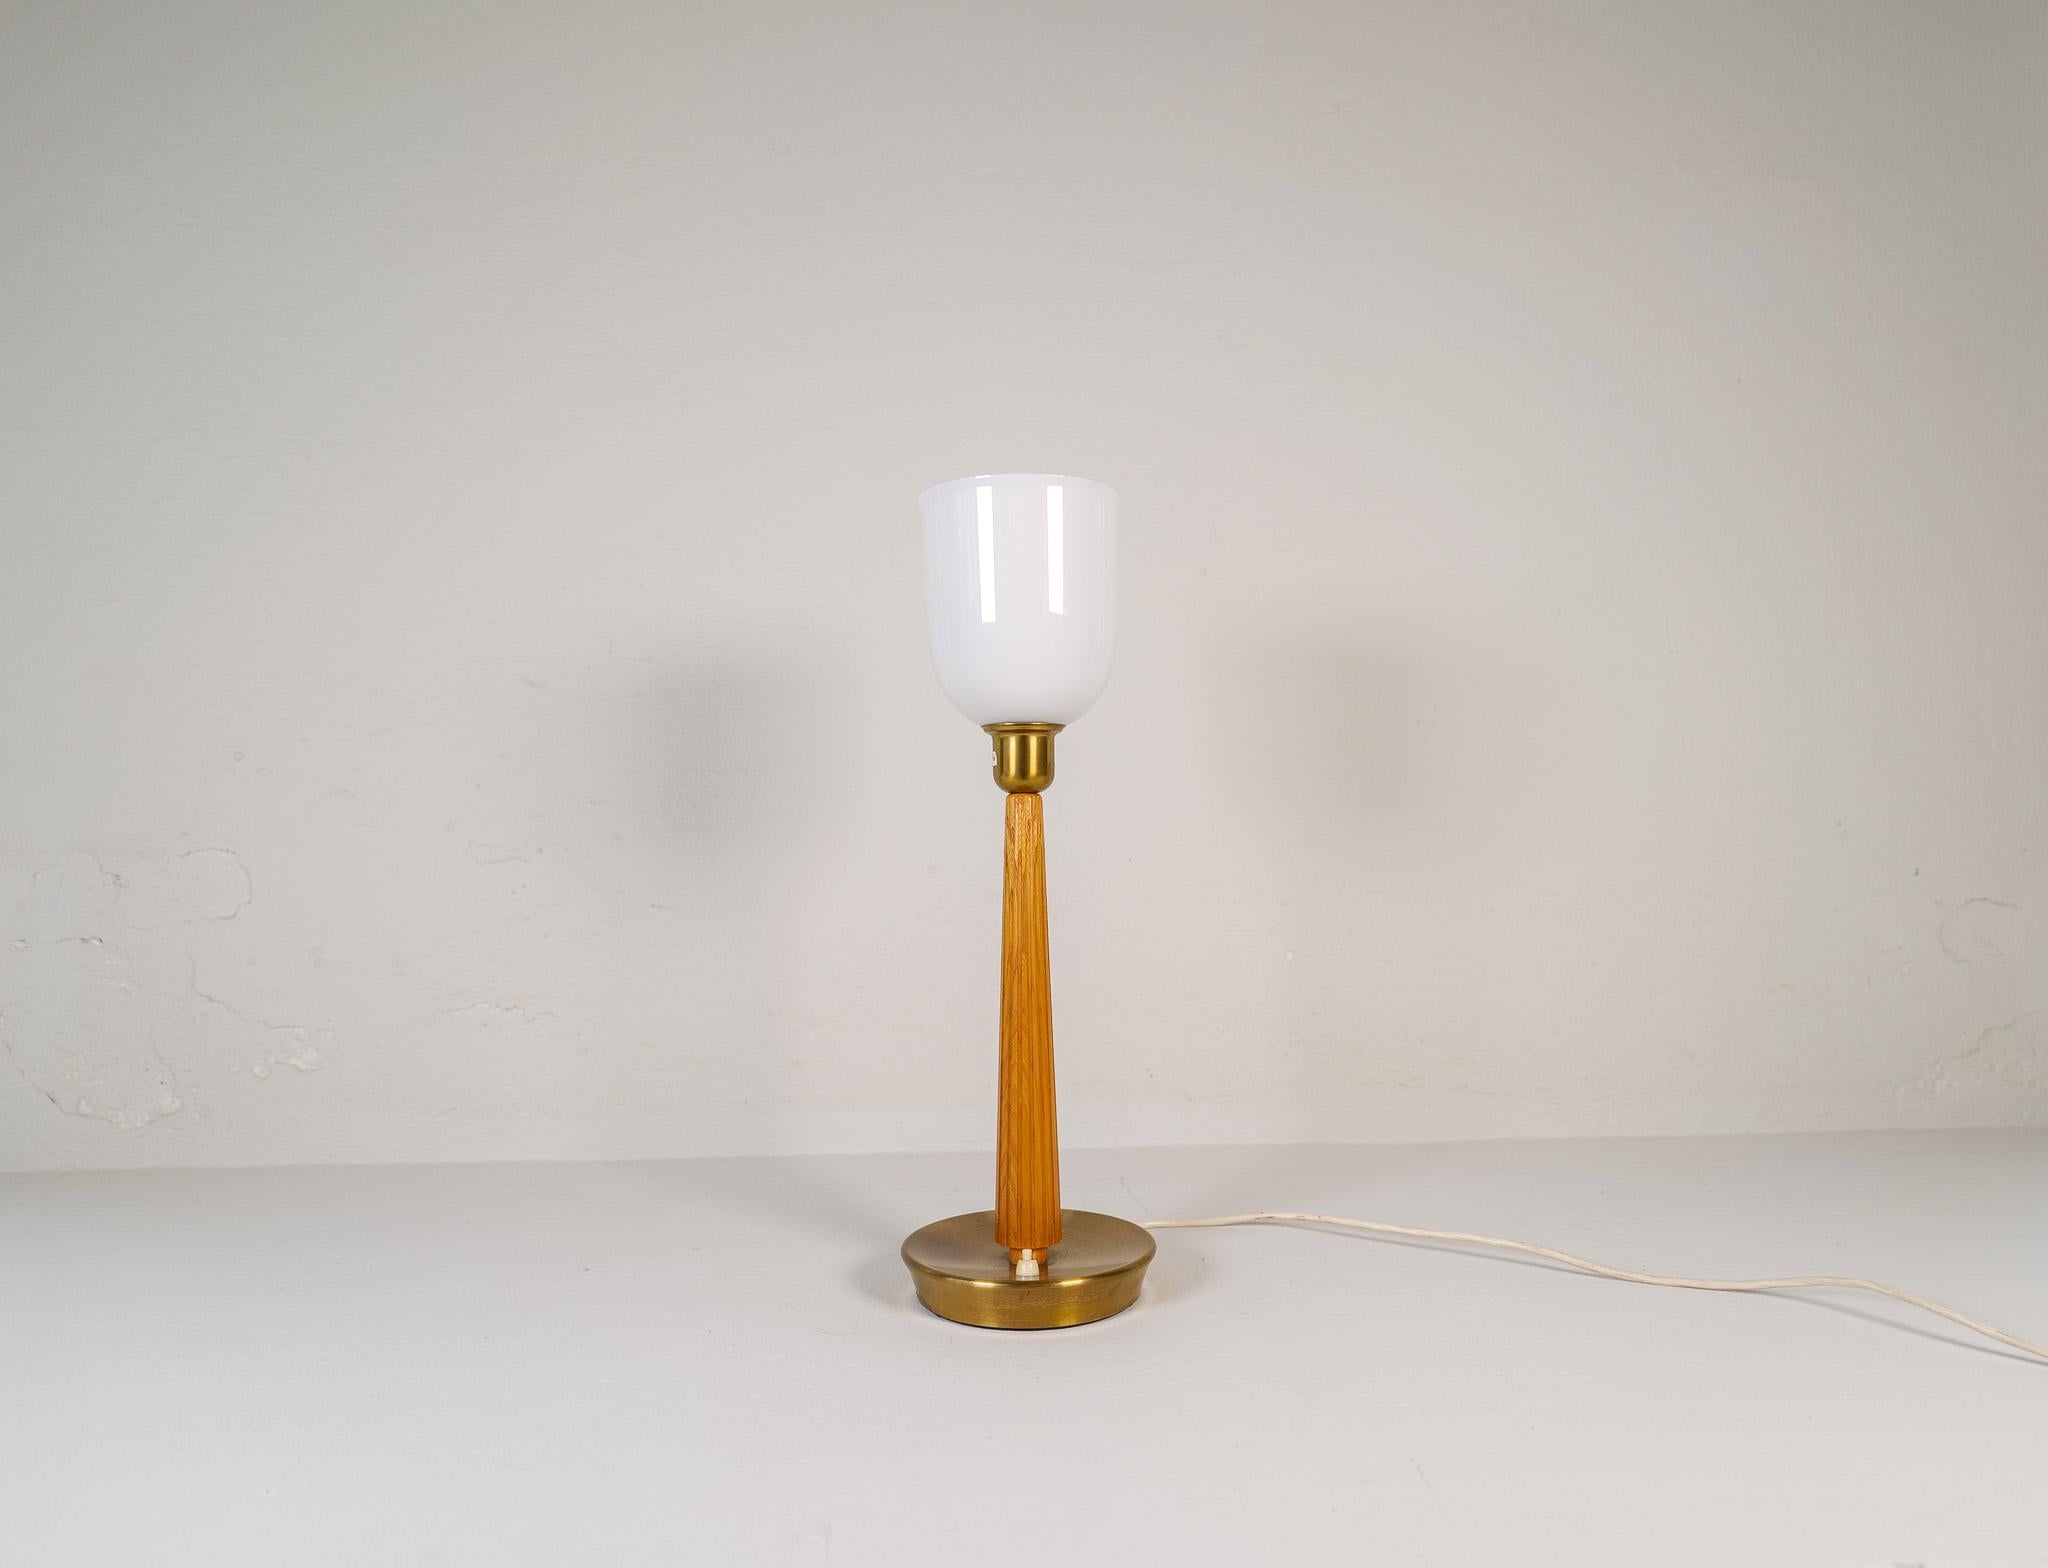 Genuinely nice Swedish table lamp made in the 1940s for ASEA and designed by Hans Bergström. With a brass base and a wooden rod leading up to a opaline glass. 

Good condition with some wear consistent with age and use. The brass base can be